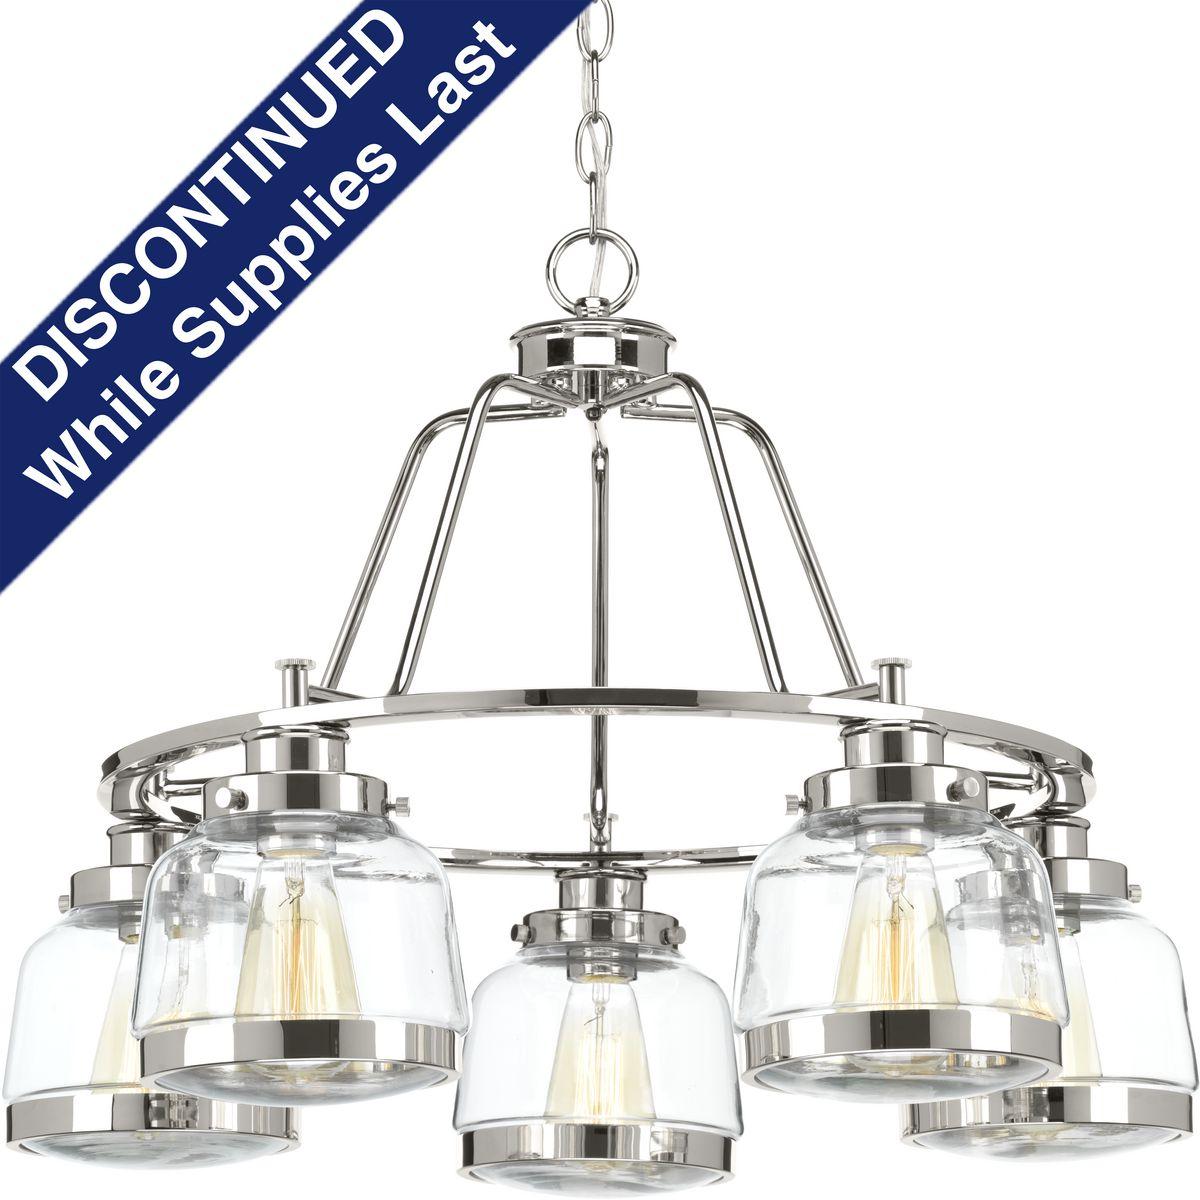 Hubbell P400058-104 The Judson collection features a timeless clear schoolhouse-style globe. Metal fittings add distinction to complete the vintage look. Judson provides the perfect compliment to farmhouse or coastal-inspired homes. Five-light chandelier in an Polished Nicke